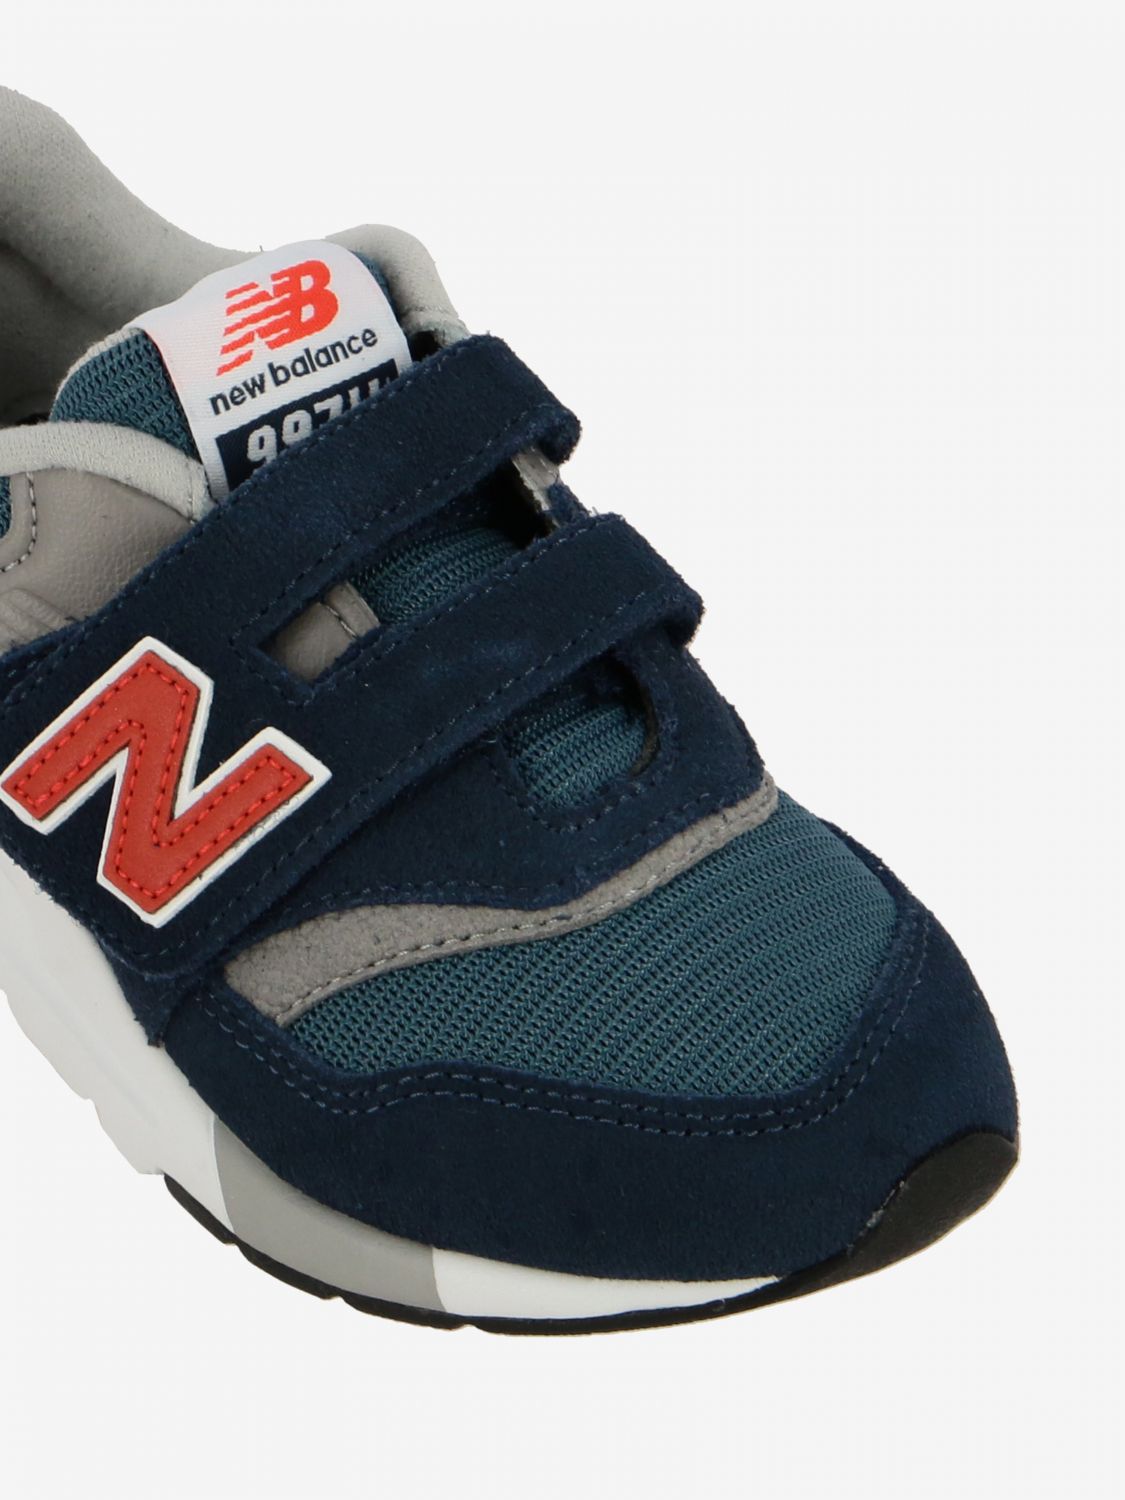 New Balance Outlet: Shoes kids - Blue | Shoes New Balance PZ997 GIGLIO.COM